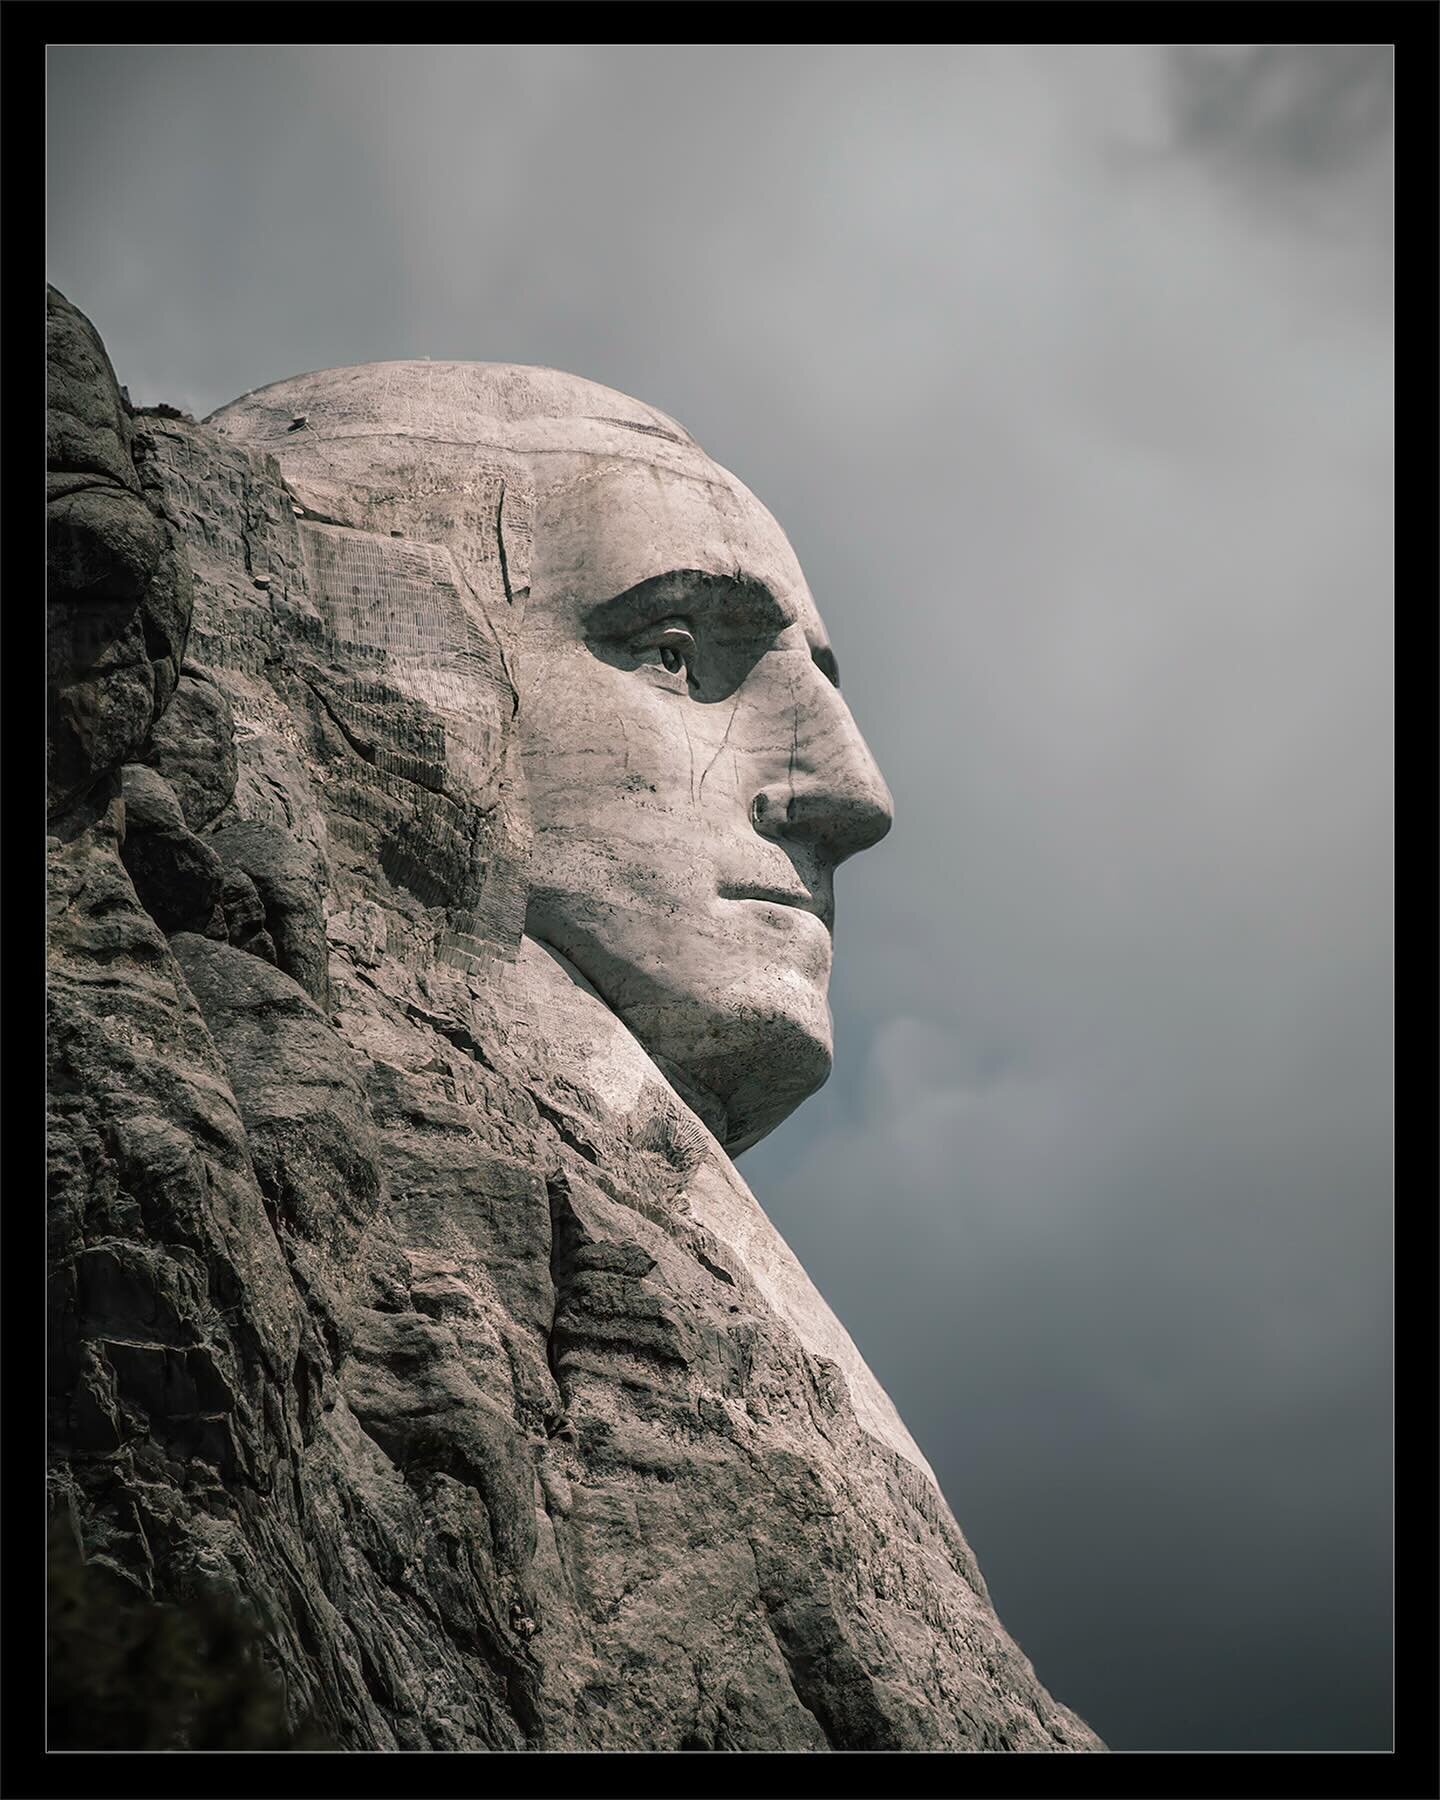 It&rsquo;s only fitting to post some shots of Mt. Rushmore on this President&rsquo;s Day Monday! Have you visited Mt. Rushmore?

⏮️ SWIPE SERIES ⏭️

#mountrushmore #mountrushmorenationalmemorial #presidentsday #presidents #mtrushmore #mountrushmorena